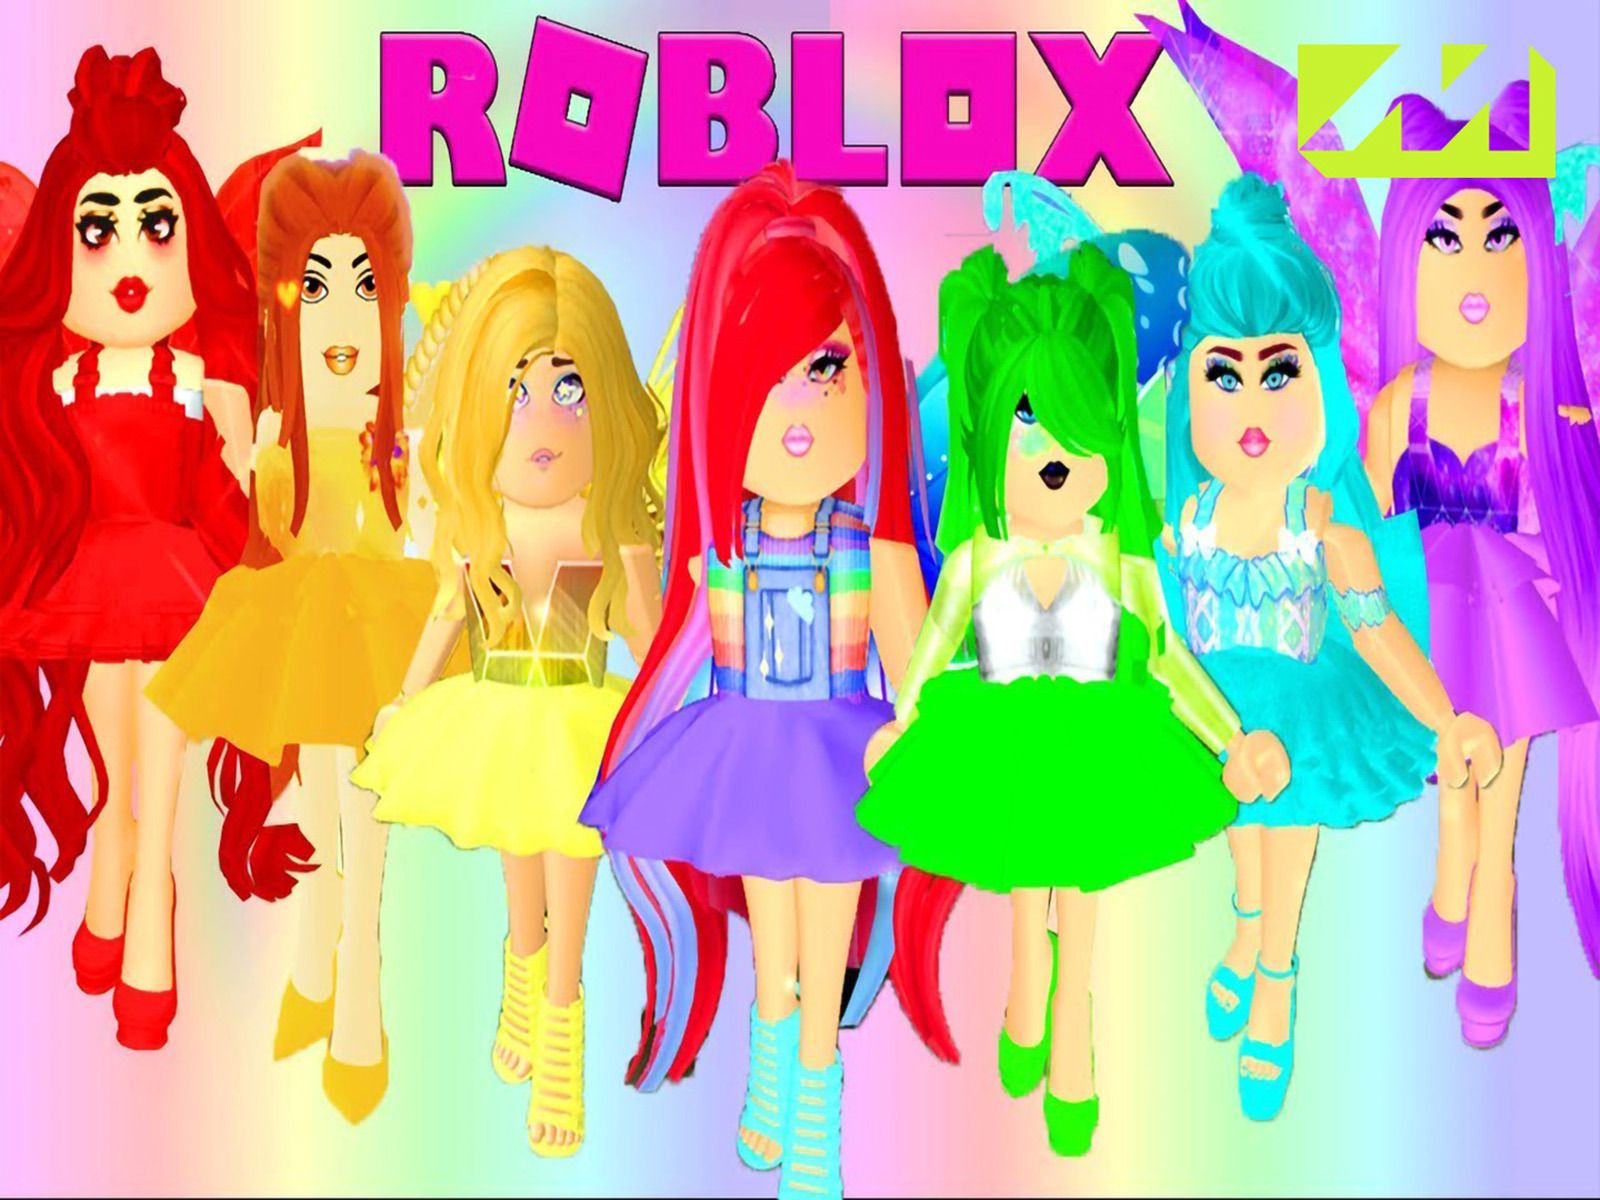 Girl Roblox Wallpapers - Wallpaper Cave AD7